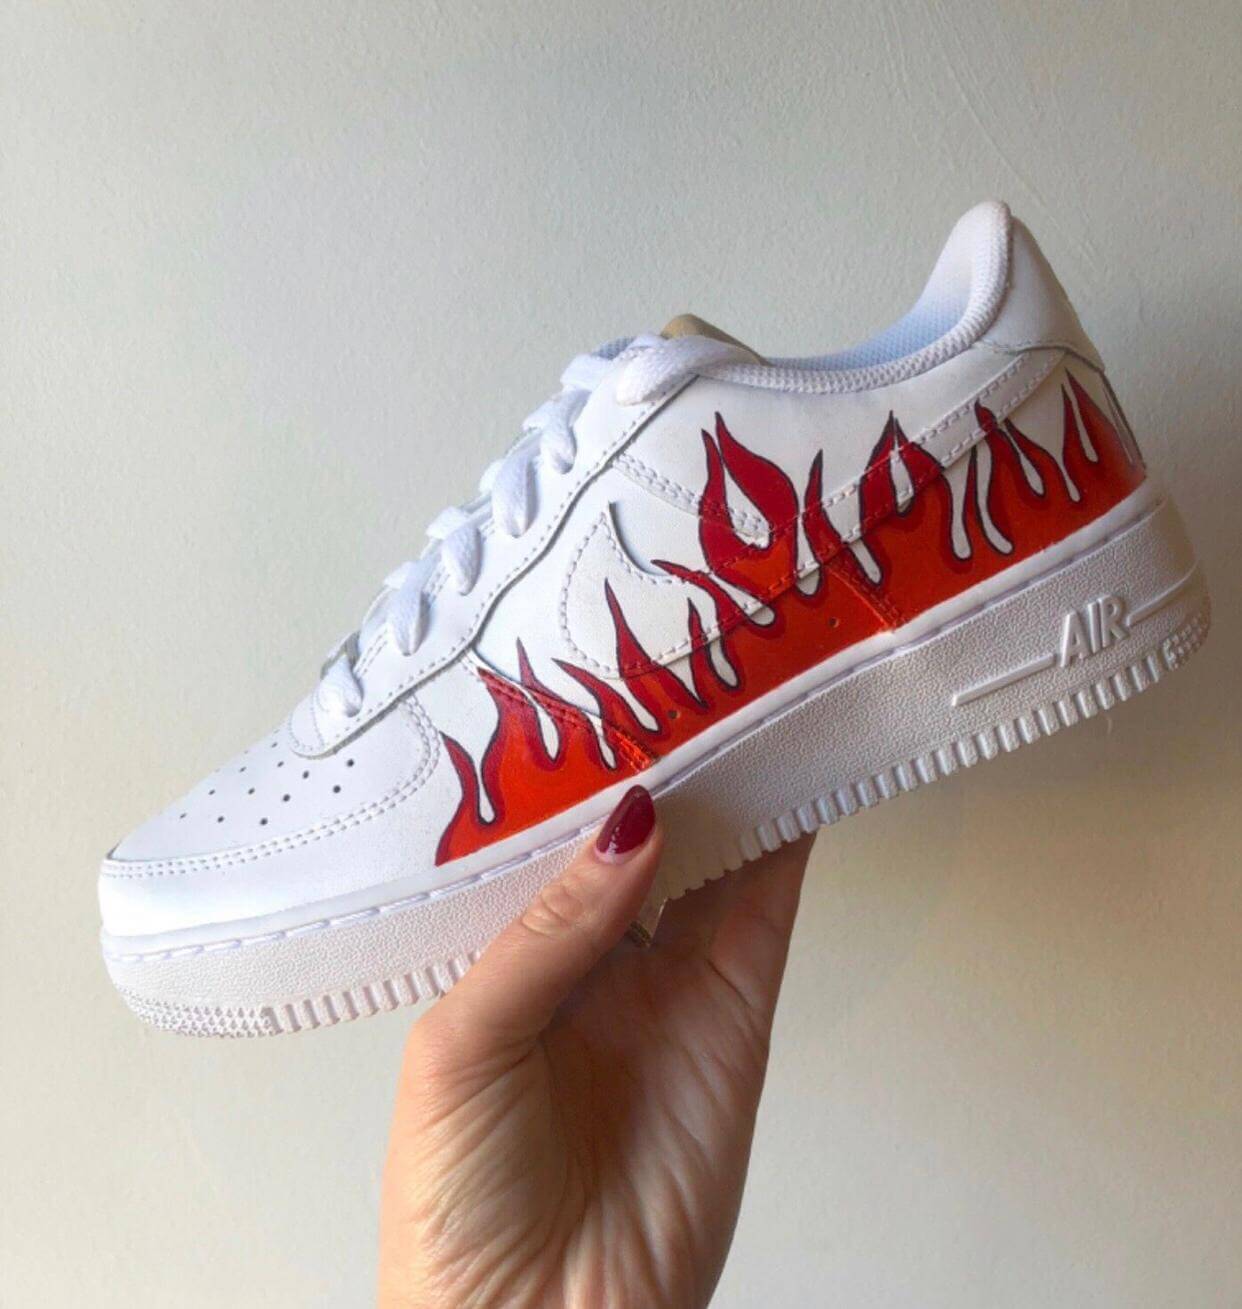 flames red and orange with black outline on well known high end brand nike, air force 1 these are hand painted designs